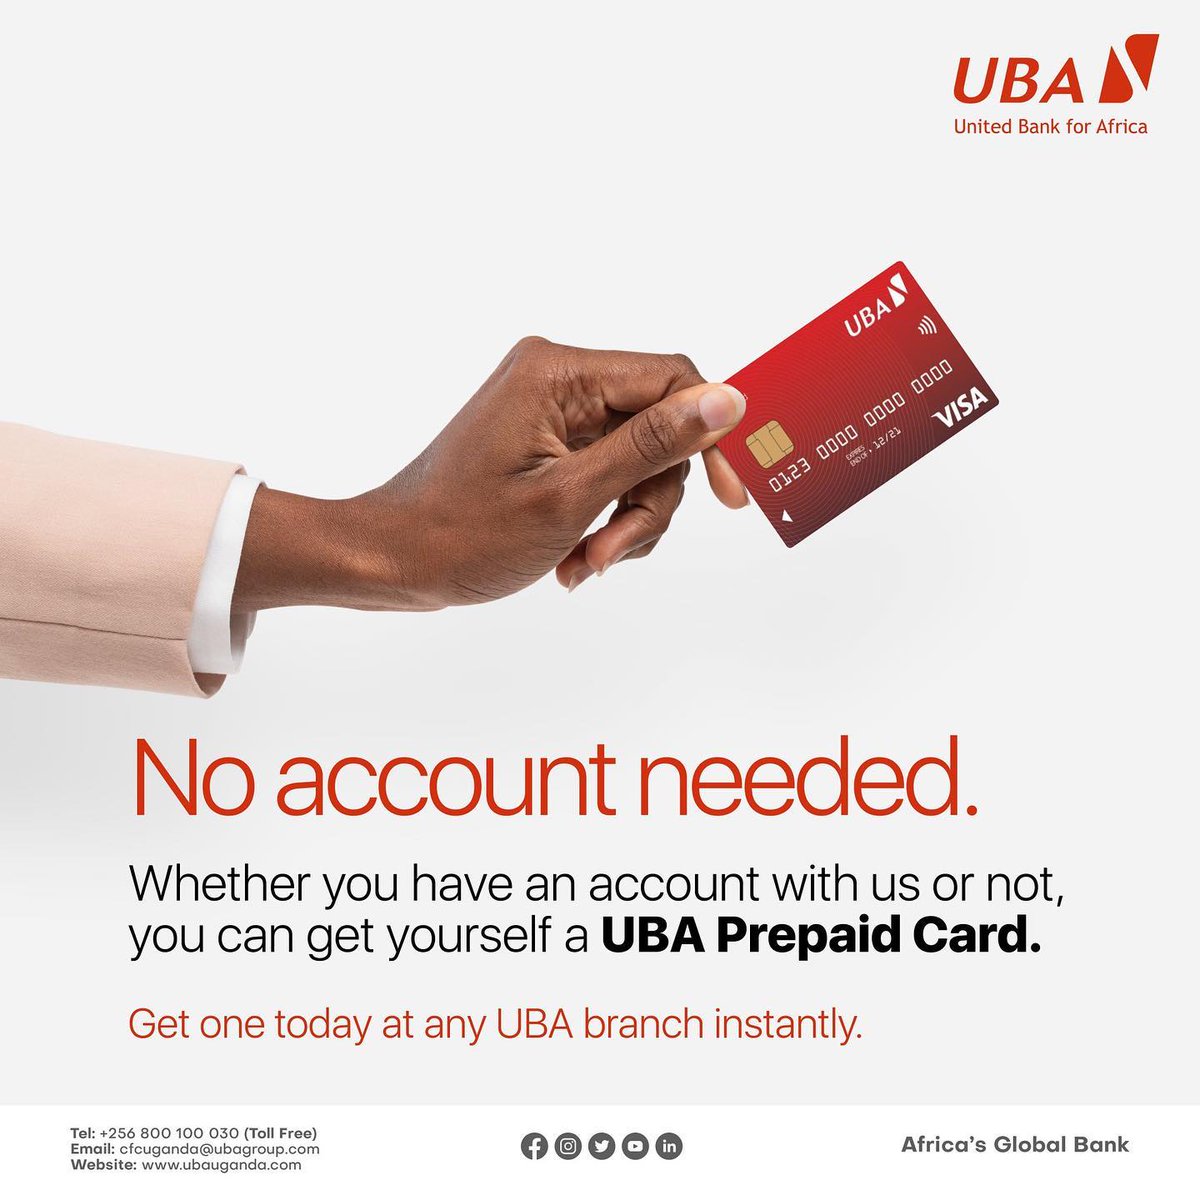 Whether you have an account with us or not, you can have a UBA Prepaid card with us. Simply visit any branch to get one, all you need is a passport photo and national ID/passport for non-nationals. You can also call 0800100030/0780142329 or send an email to…